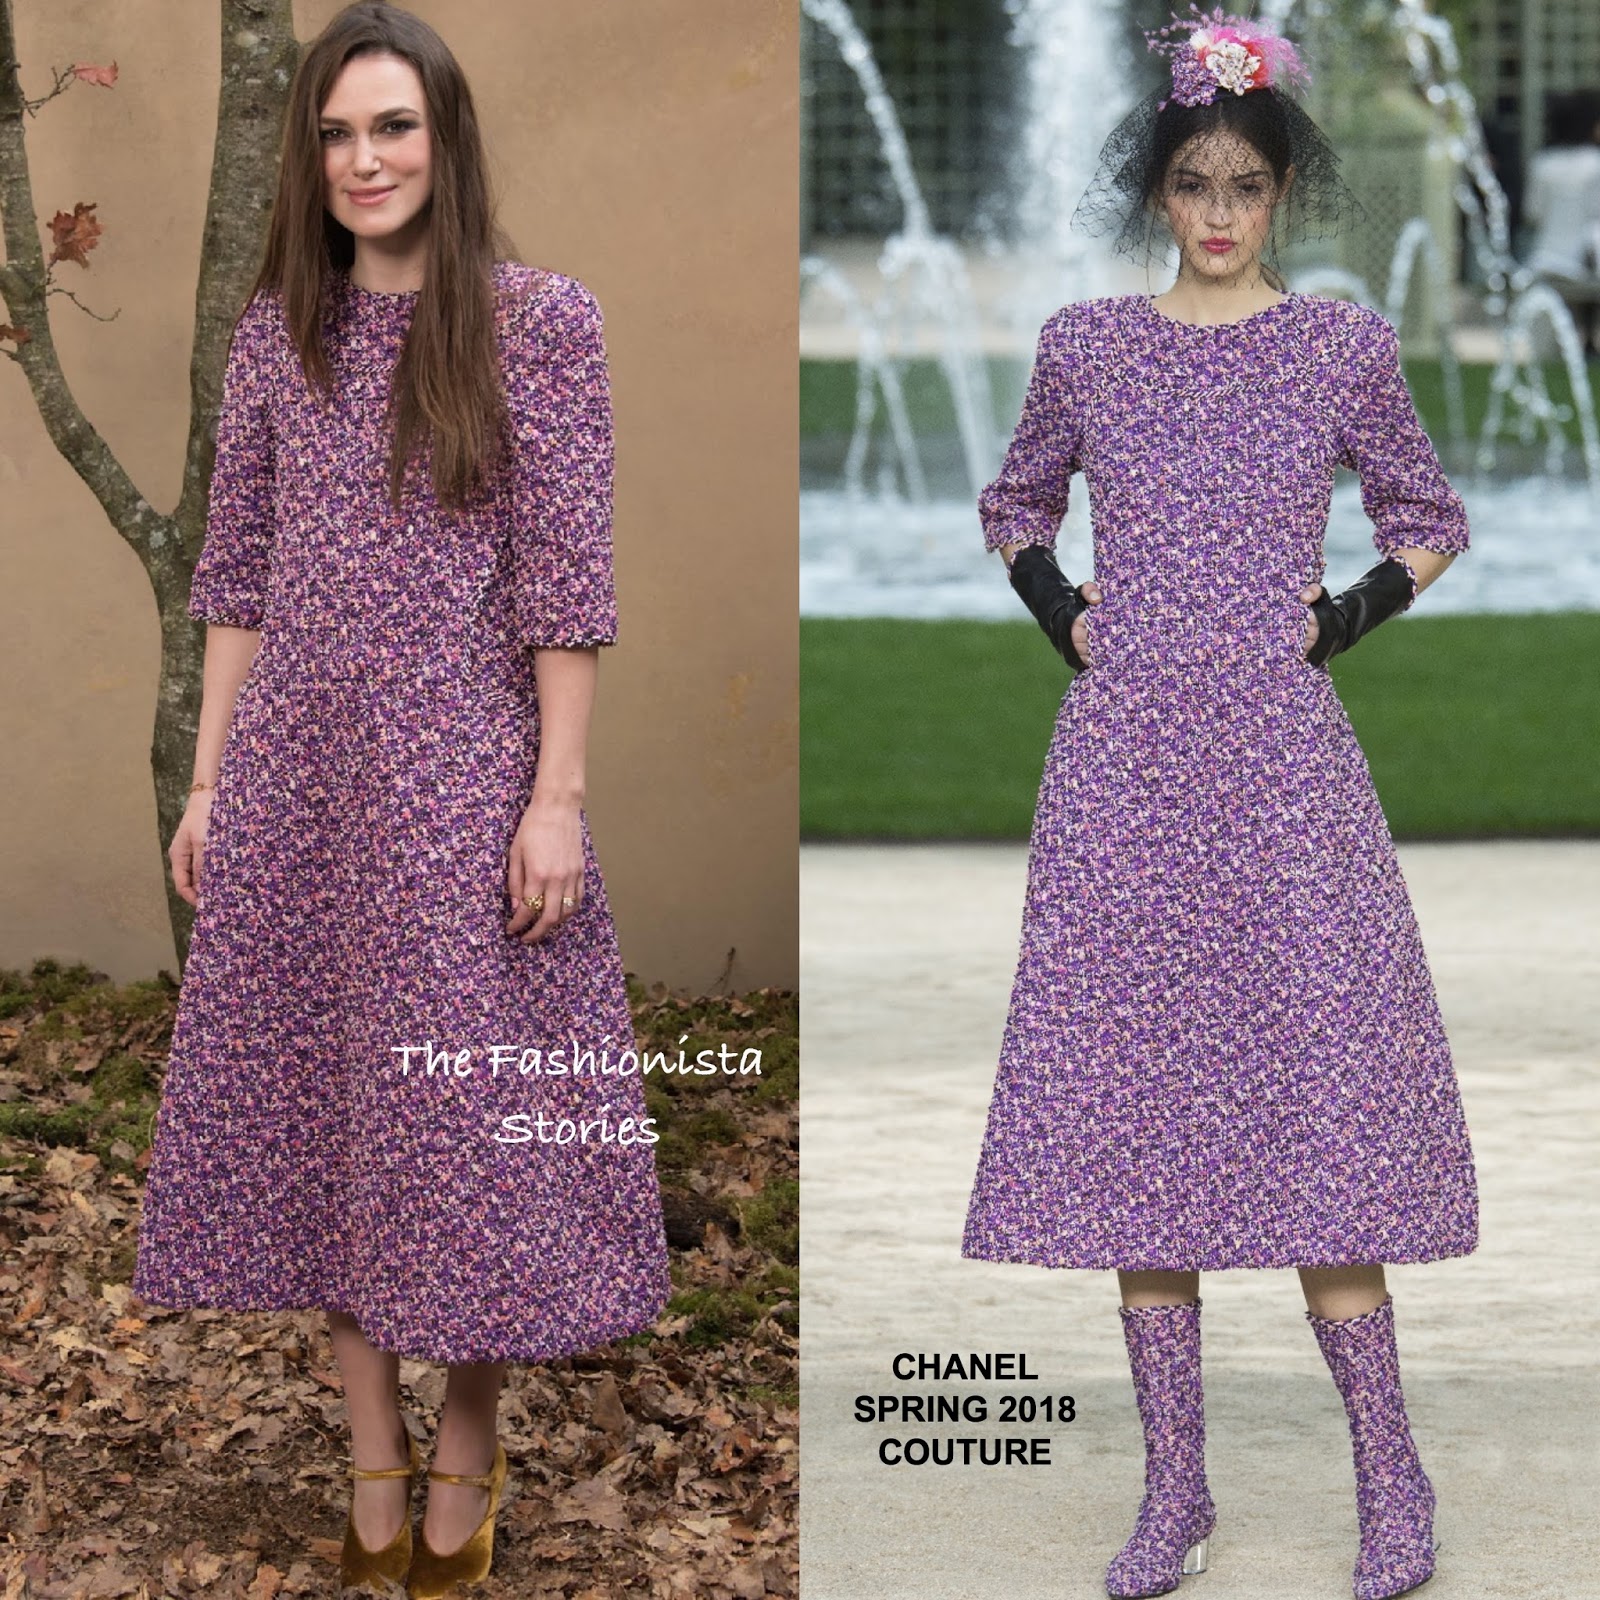 Keira Knightley in Chanel Couture at the Chanel F/W 2018 Paris Fashion Week  Runway Show